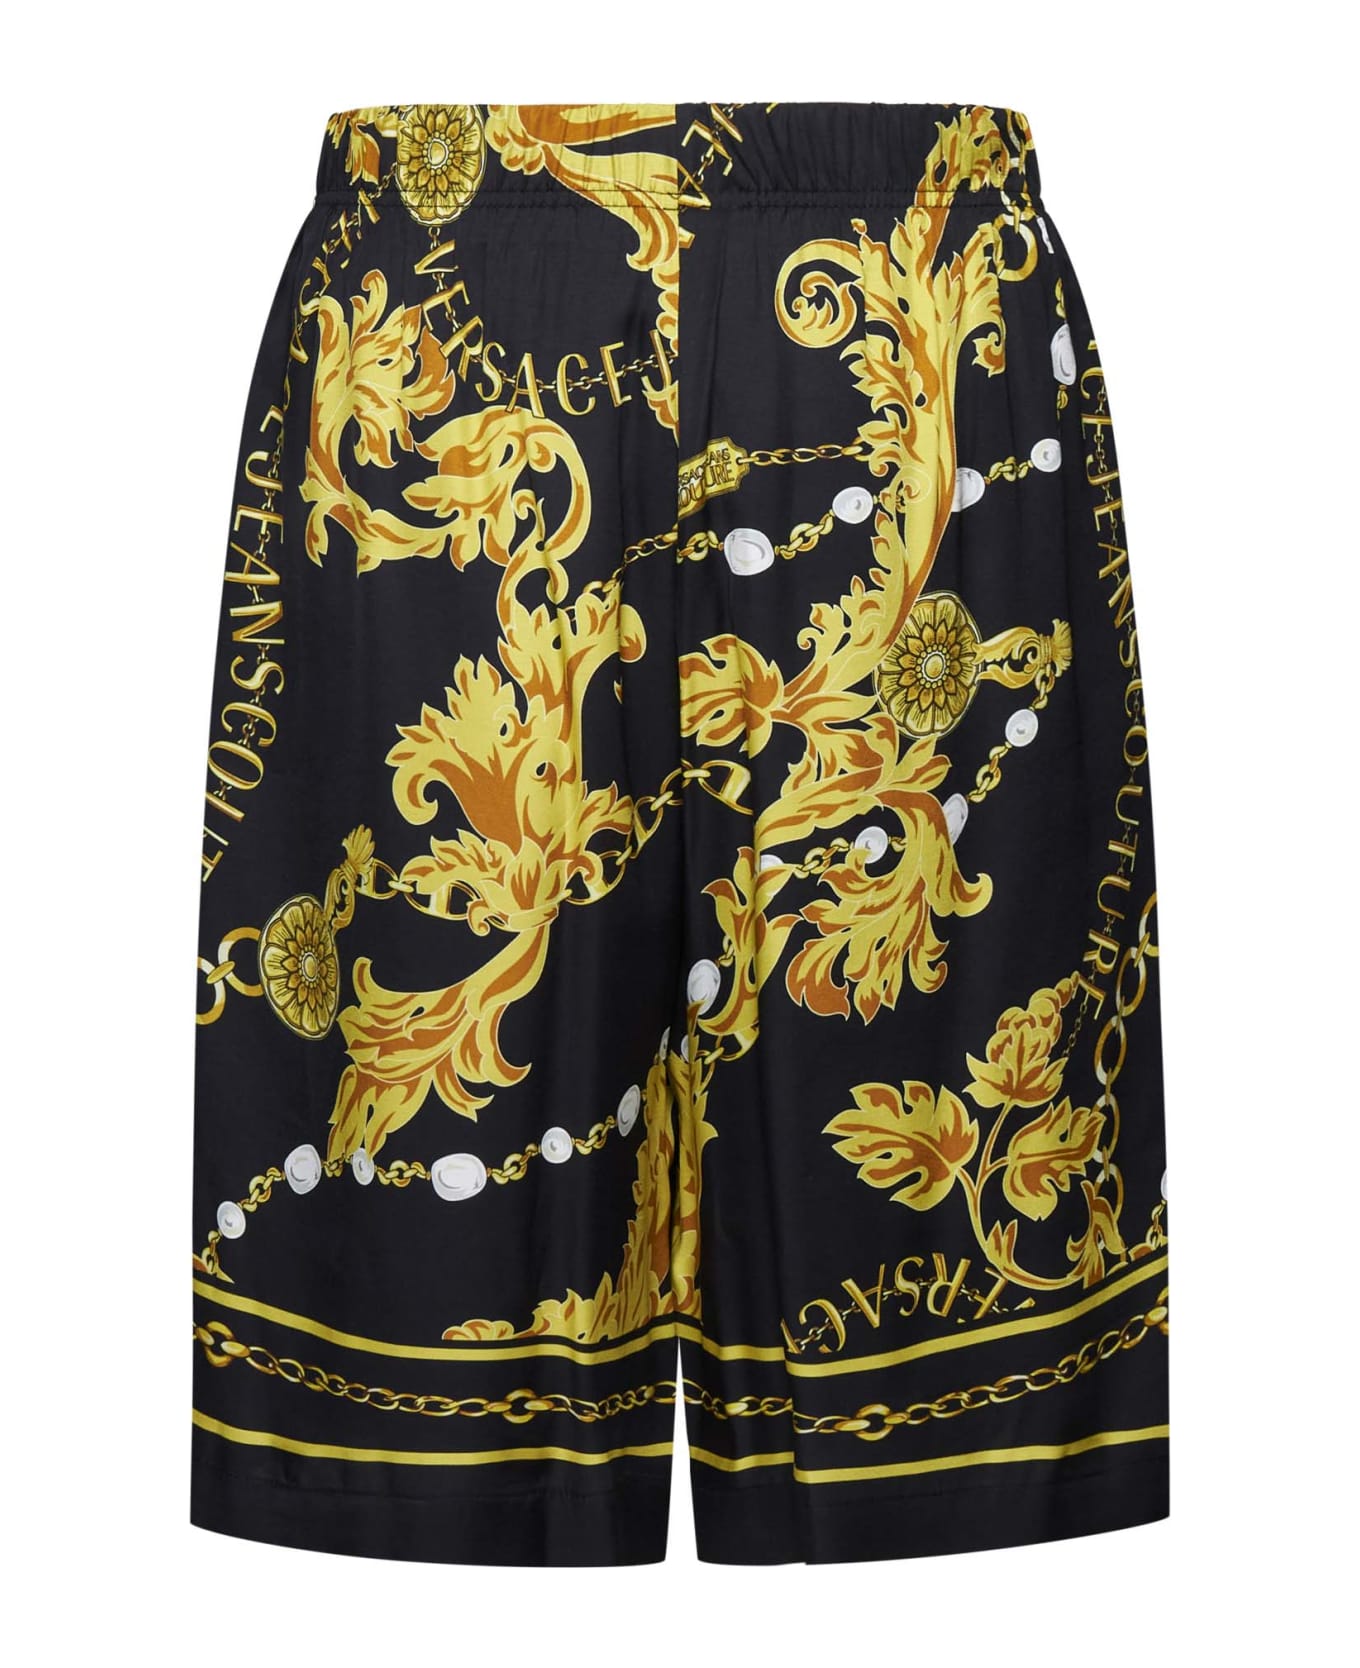 Versace Jeans Couture Chain Couture Bermuda Shorts - Black gold ショートパンツ